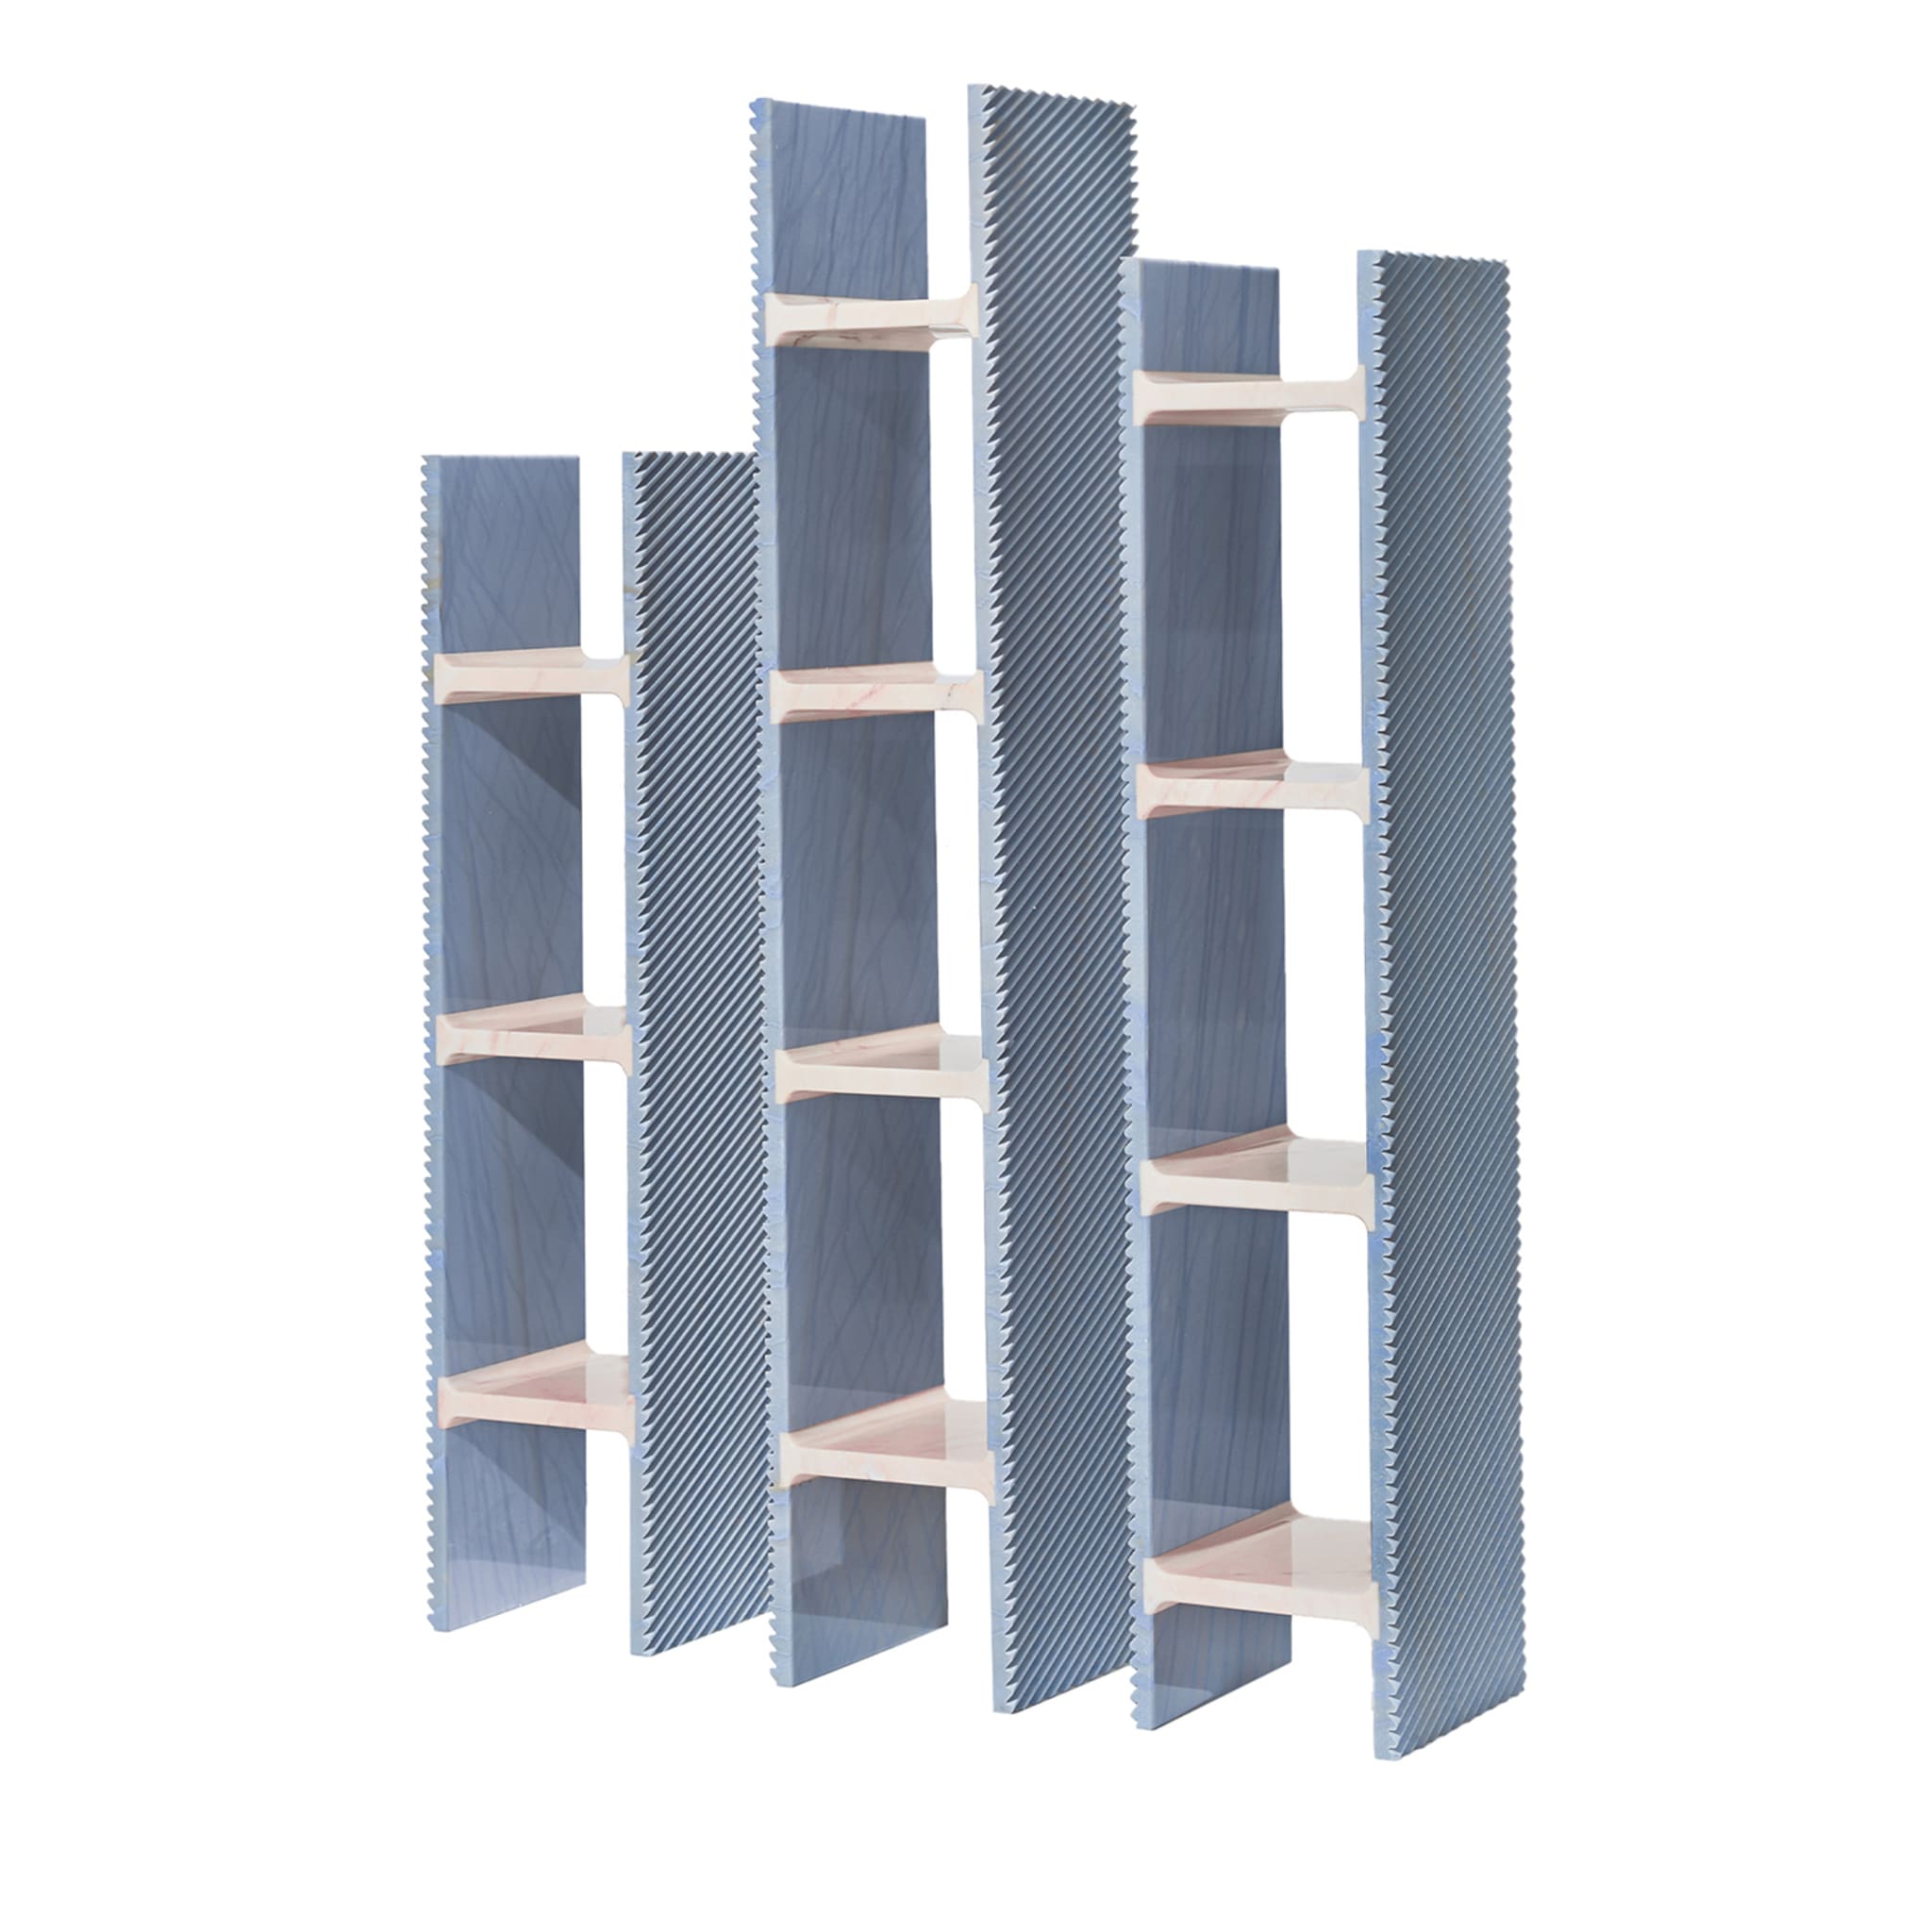 Rabbet Bookcase Display by Patricia Urquiola - Main view